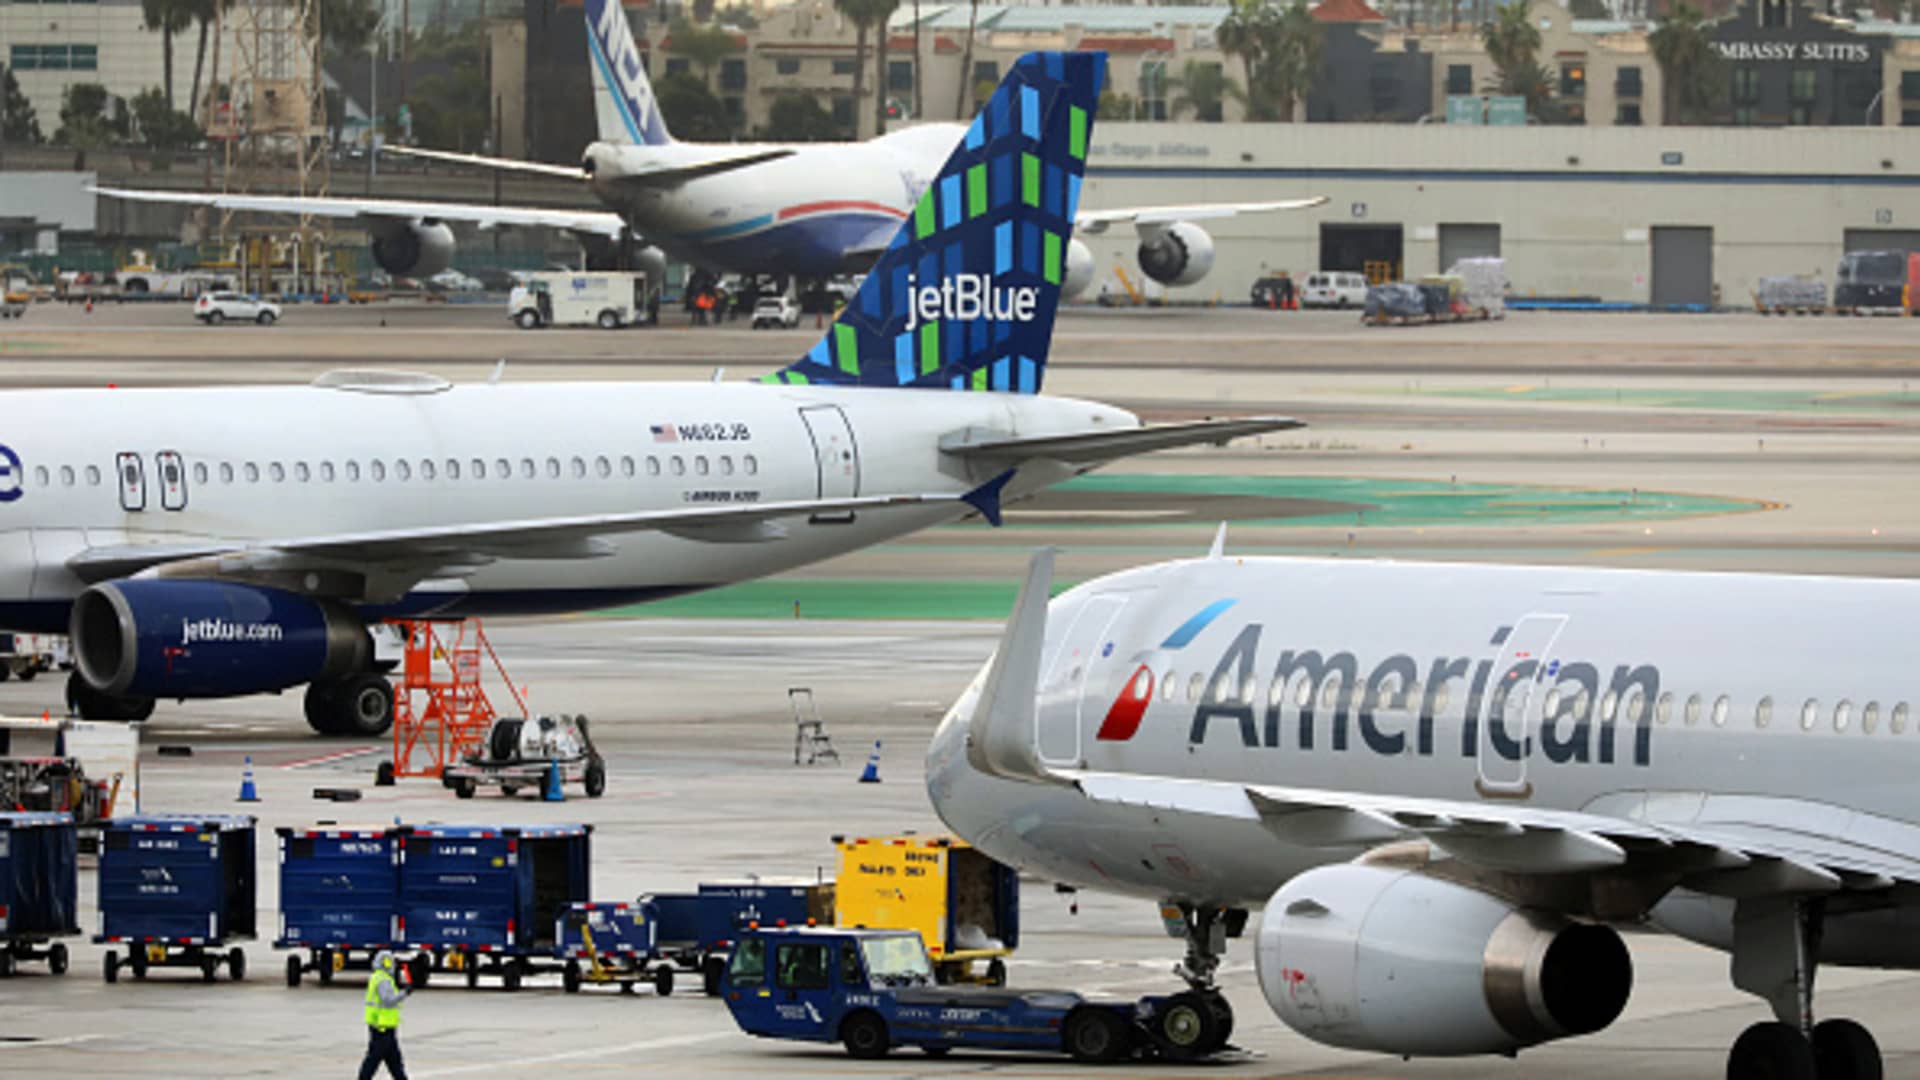 JetBlue won’t appeal ruling against American Airlines partnership